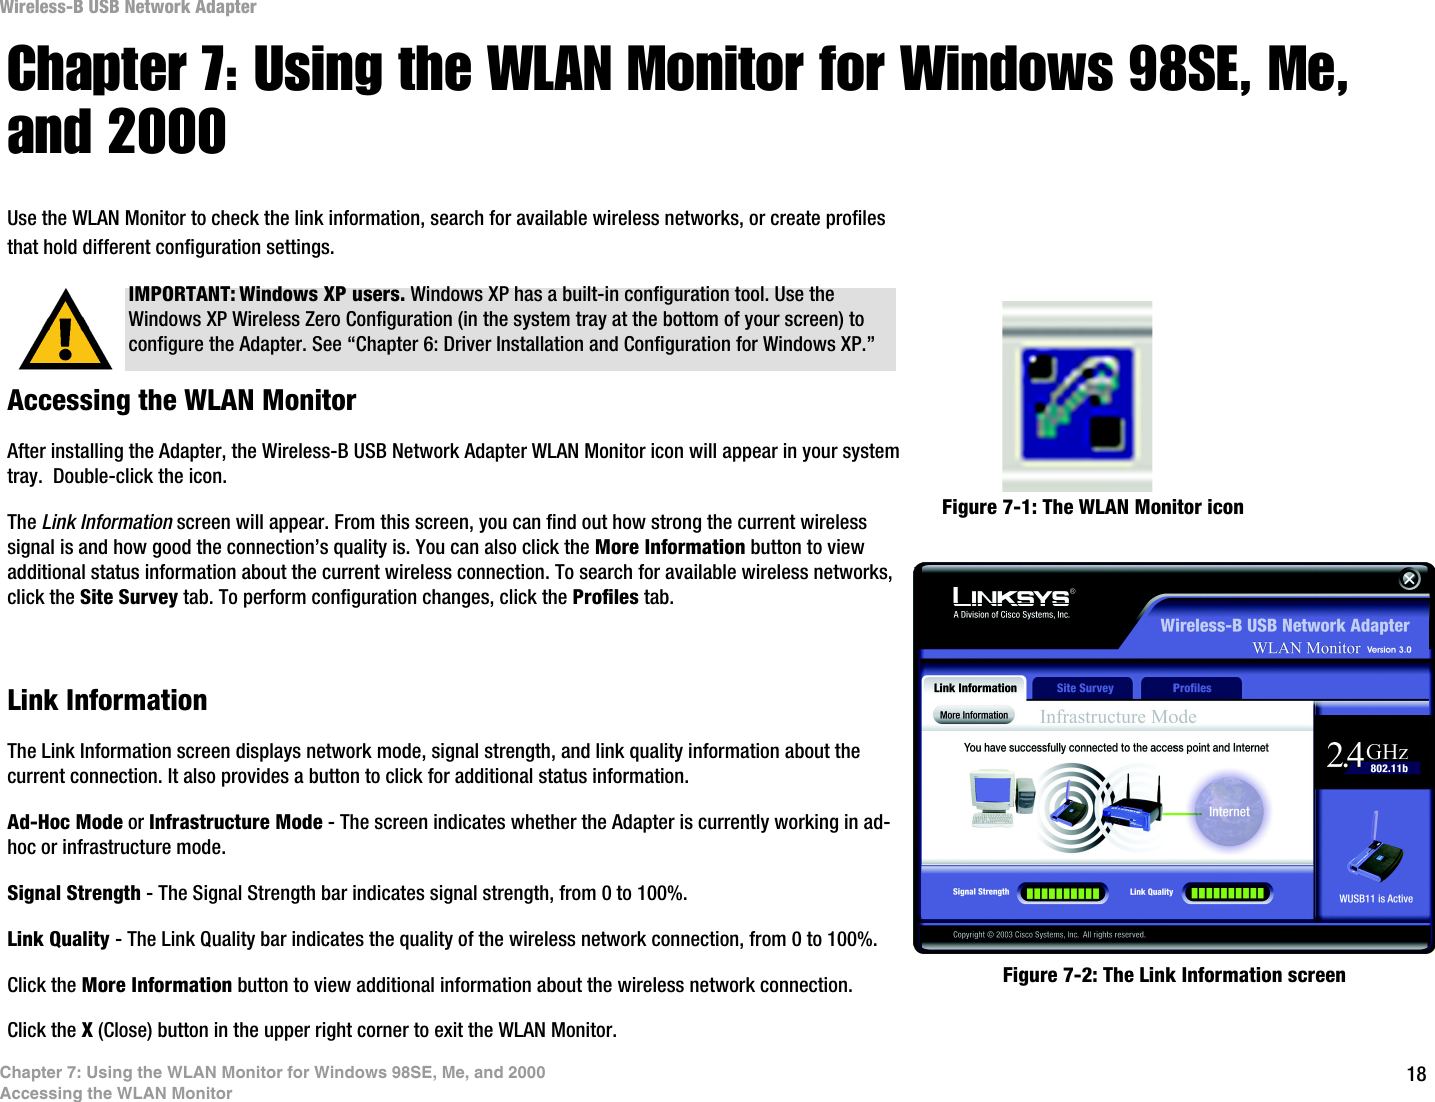 18Chapter 7: Using the WLAN Monitor for Windows 98SE, Me, and 2000Accessing the WLAN MonitorWireless-B USB Network AdapterChapter 7: Using the WLAN Monitor for Windows 98SE, Me, and 2000Use the WLAN Monitor to check the link information, search for available wireless networks, or create profiles that hold different configuration settings.Accessing the WLAN MonitorAfter installing the Adapter, the Wireless-B USB Network Adapter WLAN Monitor icon will appear in your system tray.  Double-click the icon.The Link Information screen will appear. From this screen, you can find out how strong the current wireless signal is and how good the connection’s quality is. You can also click the More Information button to view additional status information about the current wireless connection. To search for available wireless networks, click the Site Survey tab. To perform configuration changes, click the Profiles tab.Link InformationThe Link Information screen displays network mode, signal strength, and link quality information about the current connection. It also provides a button to click for additional status information.  Ad-Hoc Mode or Infrastructure Mode - The screen indicates whether the Adapter is currently working in ad-hoc or infrastructure mode.Signal Strength - The Signal Strength bar indicates signal strength, from 0 to 100%. Link Quality - The Link Quality bar indicates the quality of the wireless network connection, from 0 to 100%.Click the More Information button to view additional information about the wireless network connection.Click the X (Close) button in the upper right corner to exit the WLAN Monitor. IMPORTANT: Windows XP users. Windows XP has a built-in configuration tool. Use the Windows XP Wireless Zero Configuration (in the system tray at the bottom of your screen) to configure the Adapter. See “Chapter 6: Driver Installation and Configuration for Windows XP.”Figure 7-1: The WLAN Monitor iconFigure 7-2: The Link Information screen